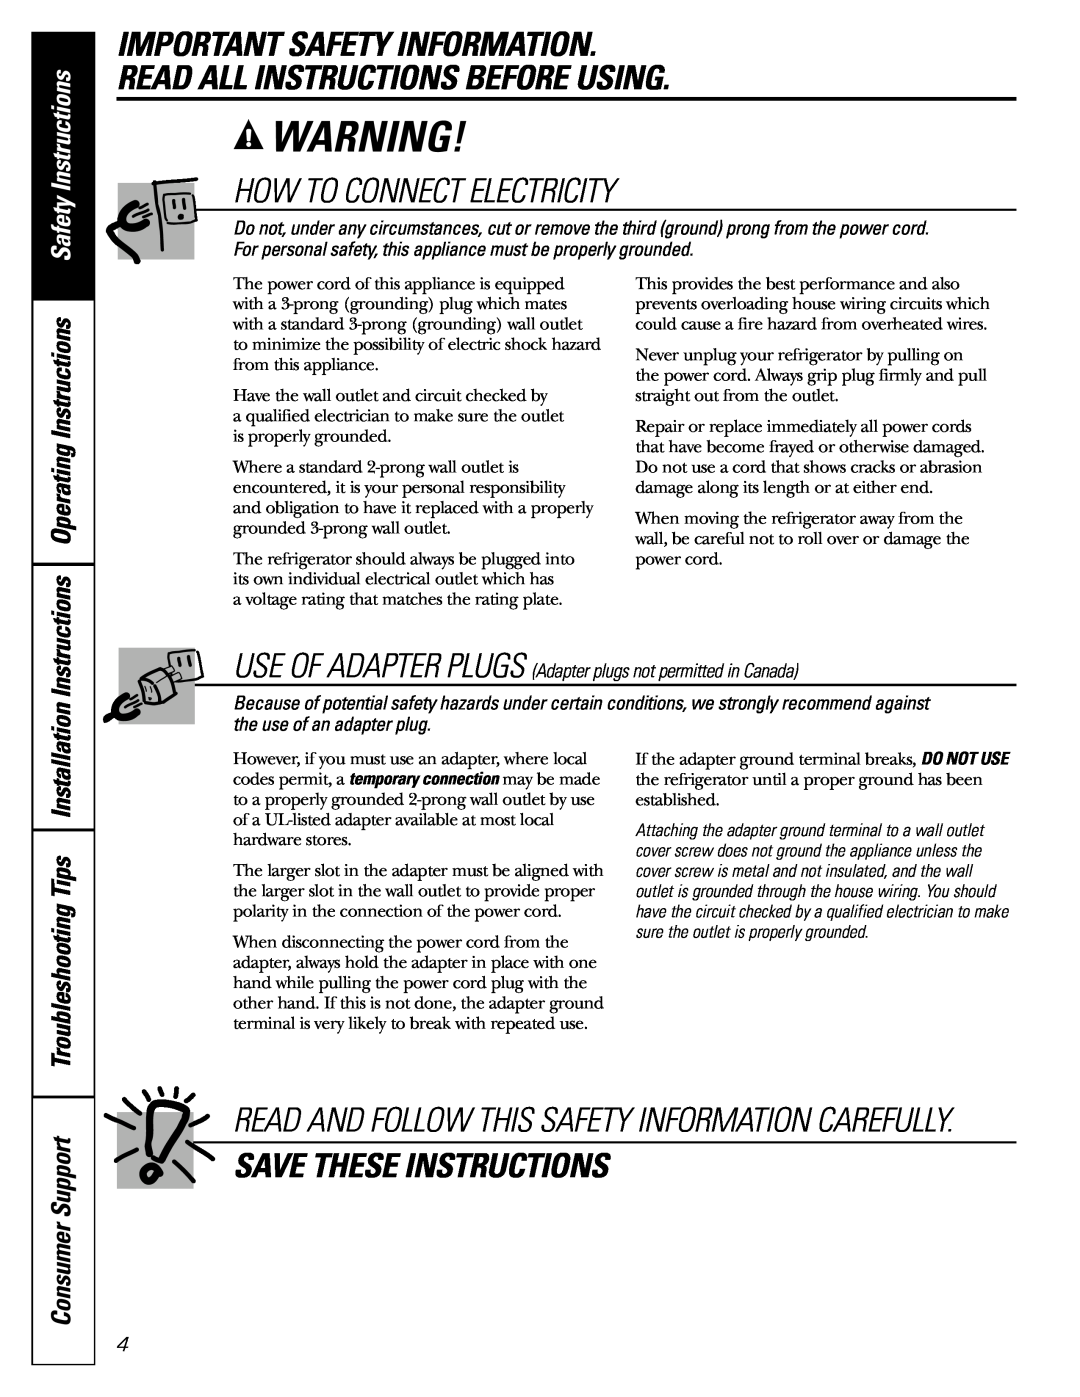 GE 18 How To Connect Electricity, Save These Instructions, Consumer Support, Instructions Operating Instructions 